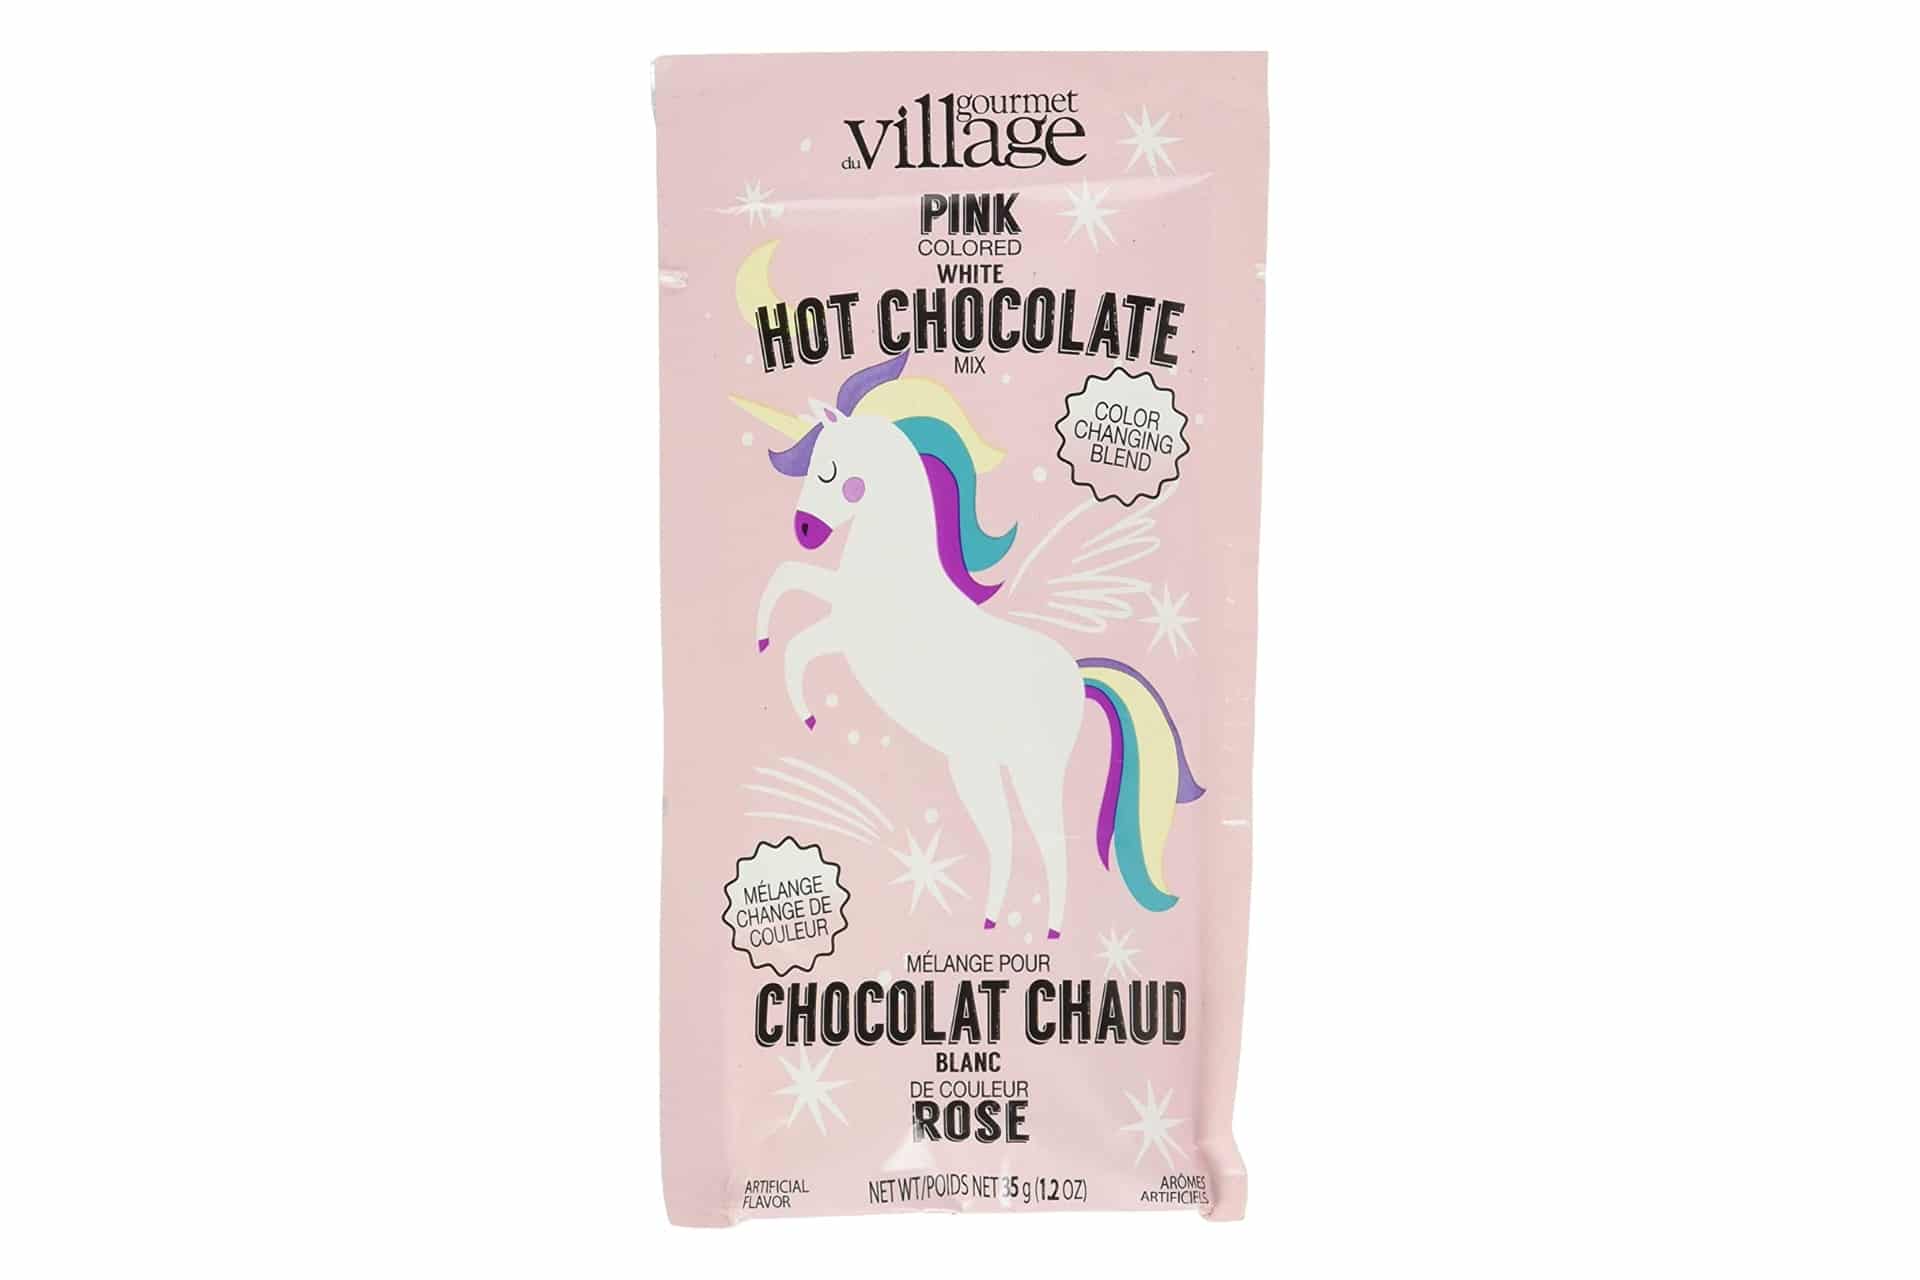 packet of hot chocolate with a unicorn illustration